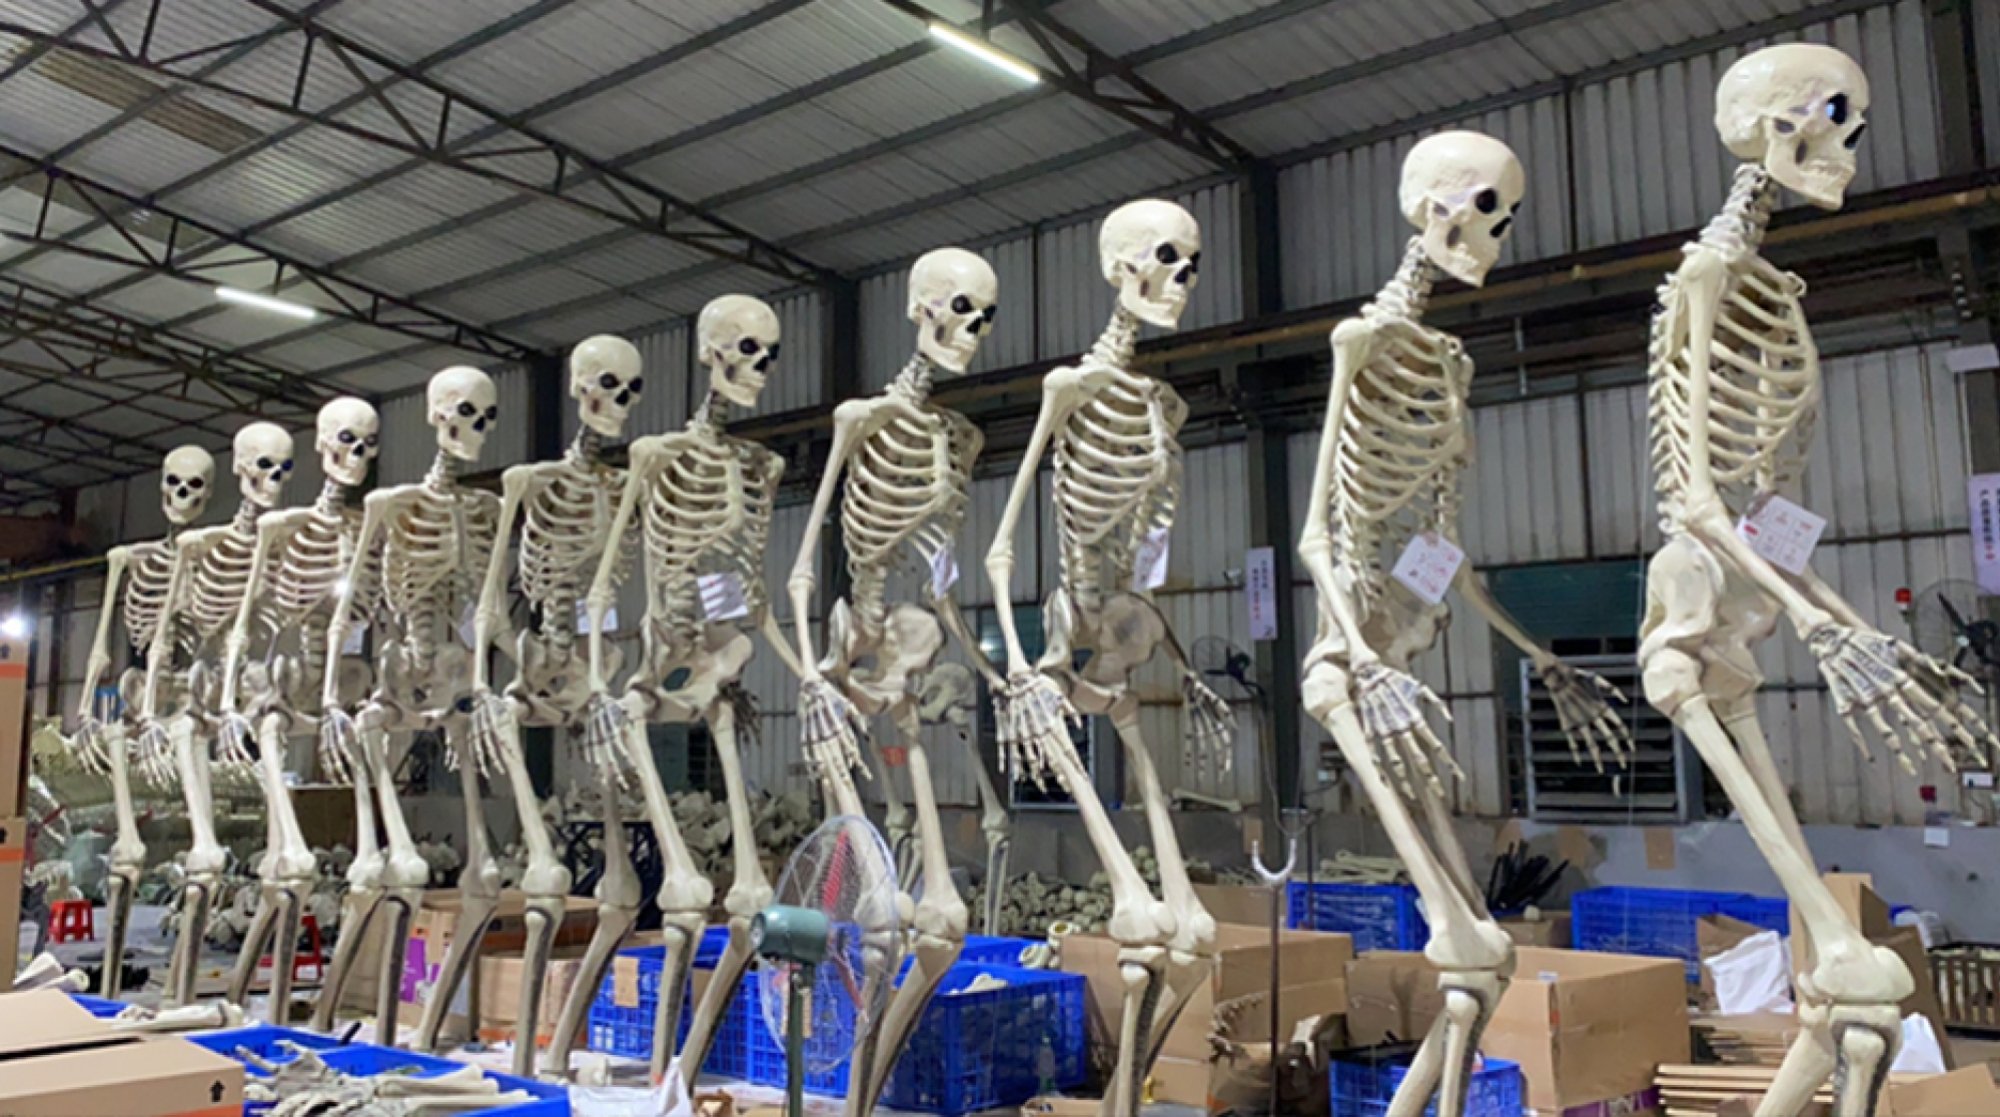 a line of home depot skeletons in a factory